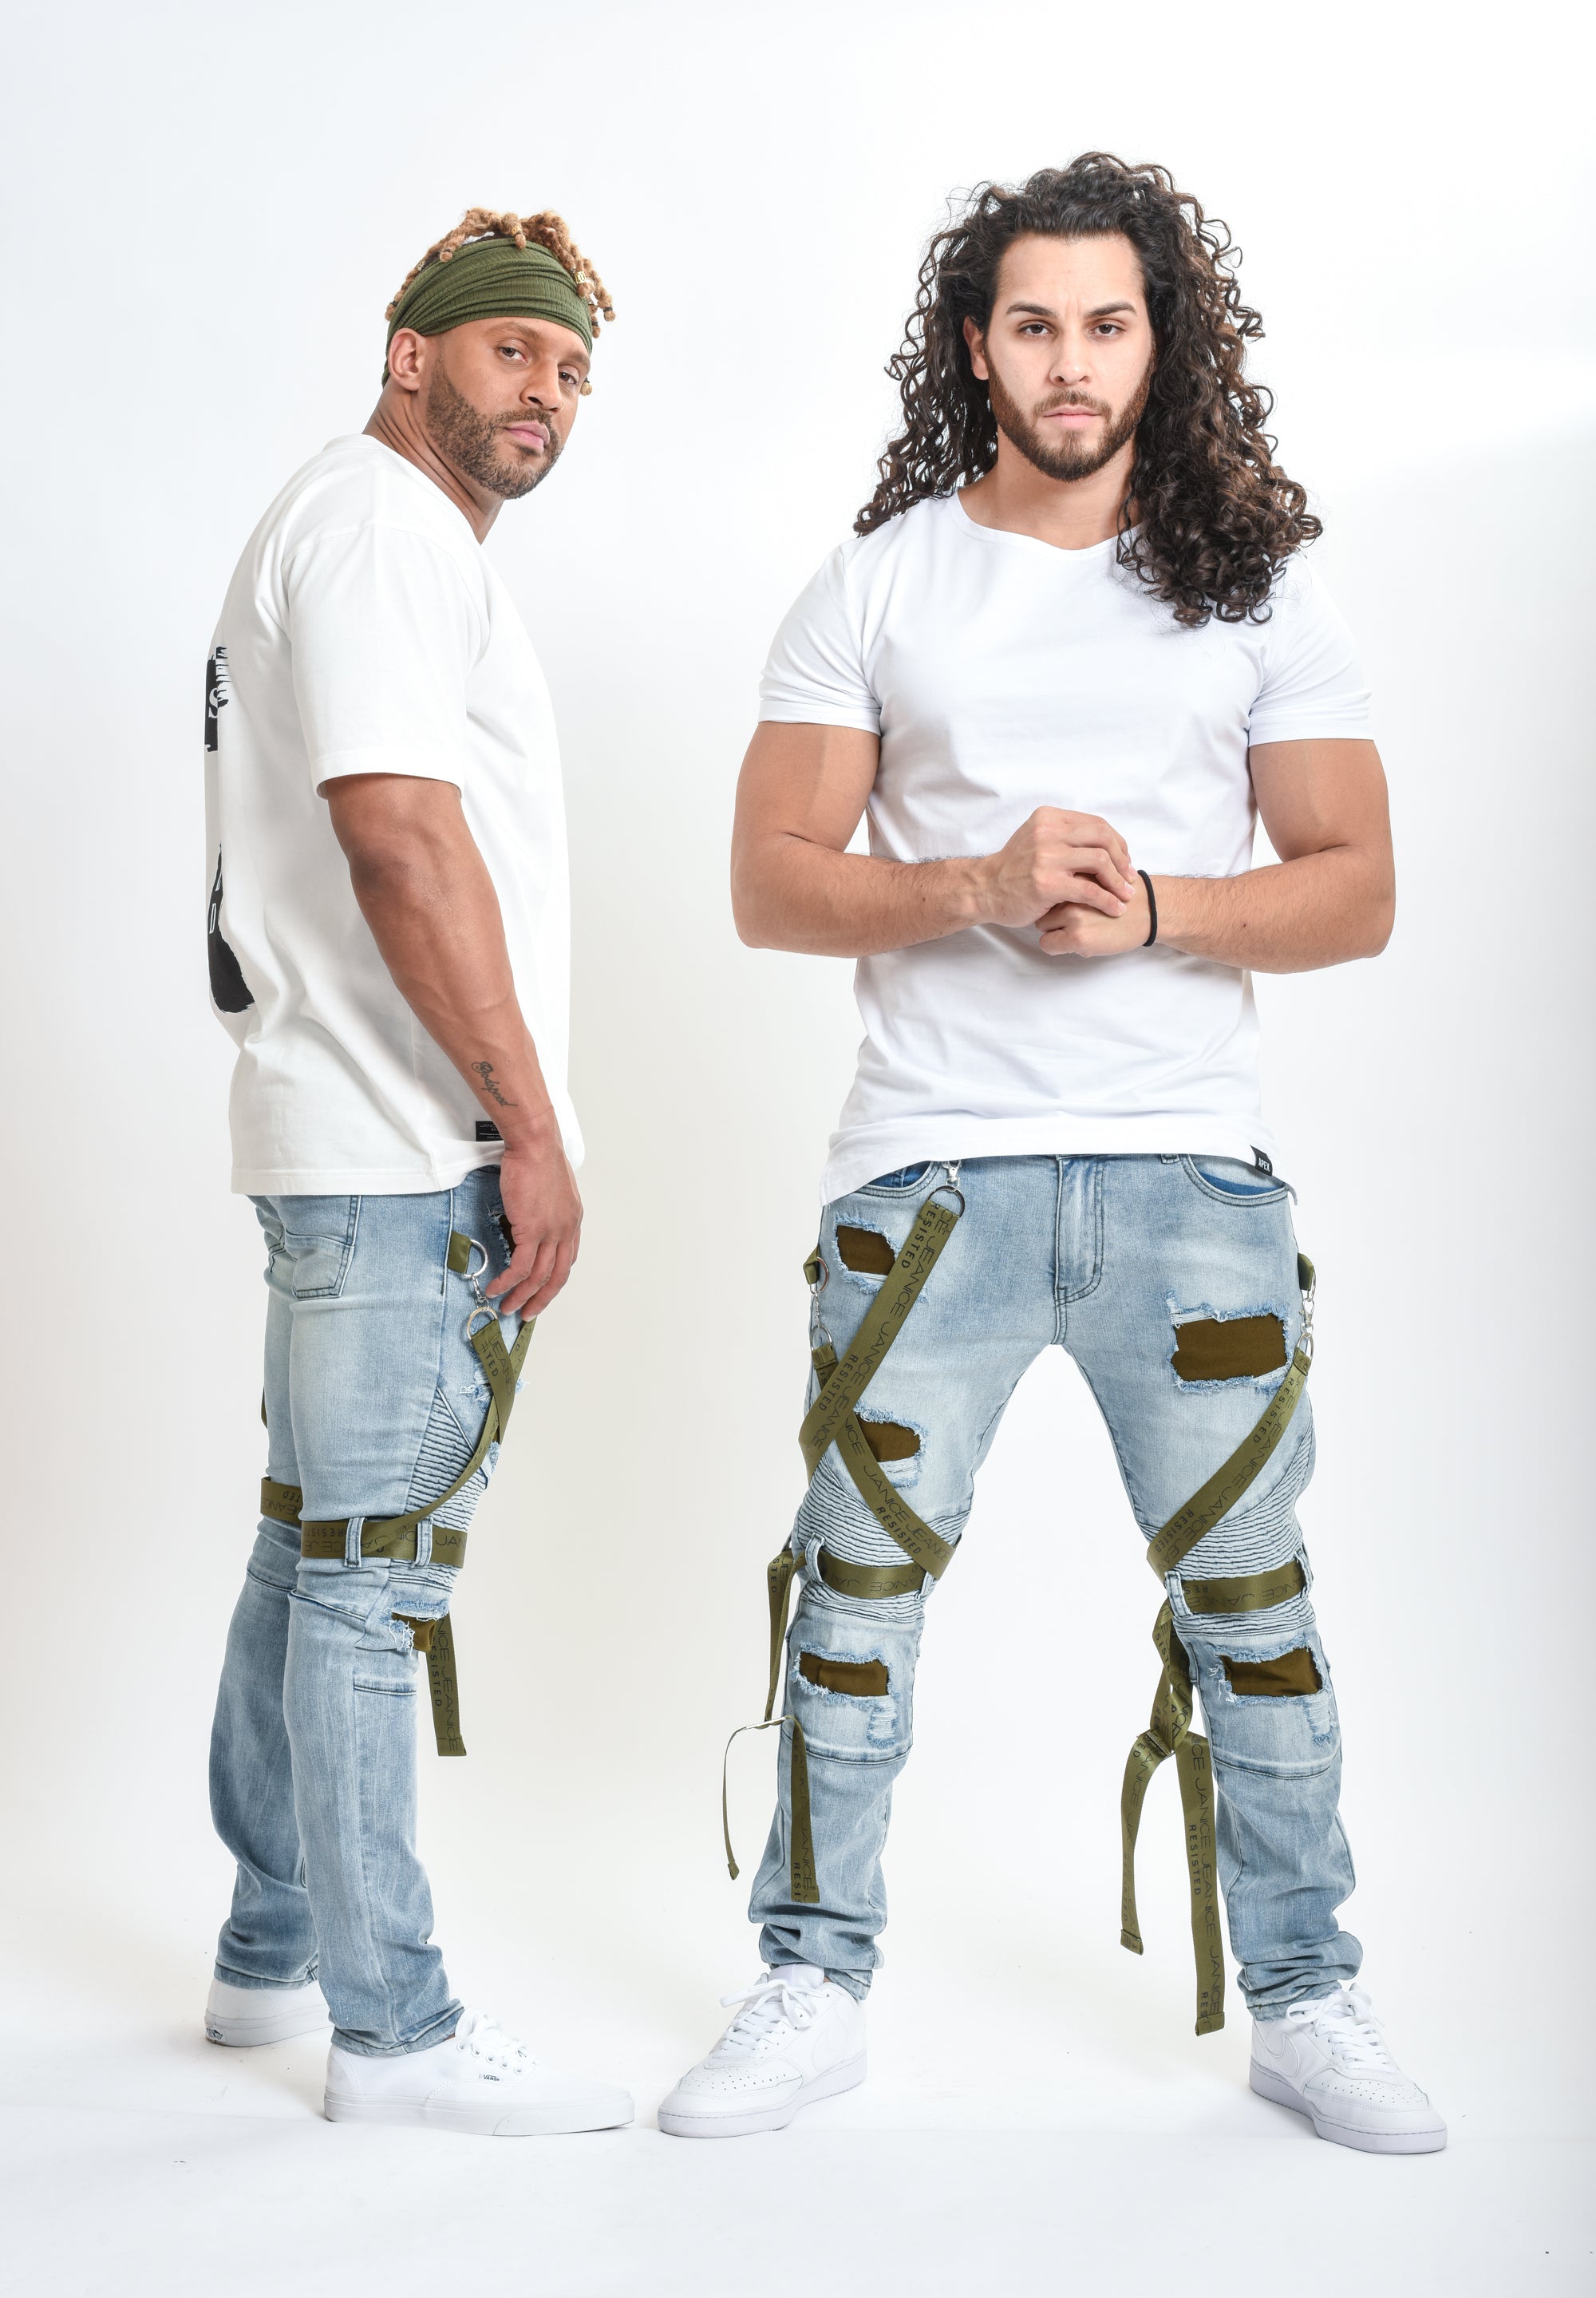 JJR GREEN STRAP BLUE JEANS - Janice Jeanice Resisted | God Led Passionate Clothing Designs